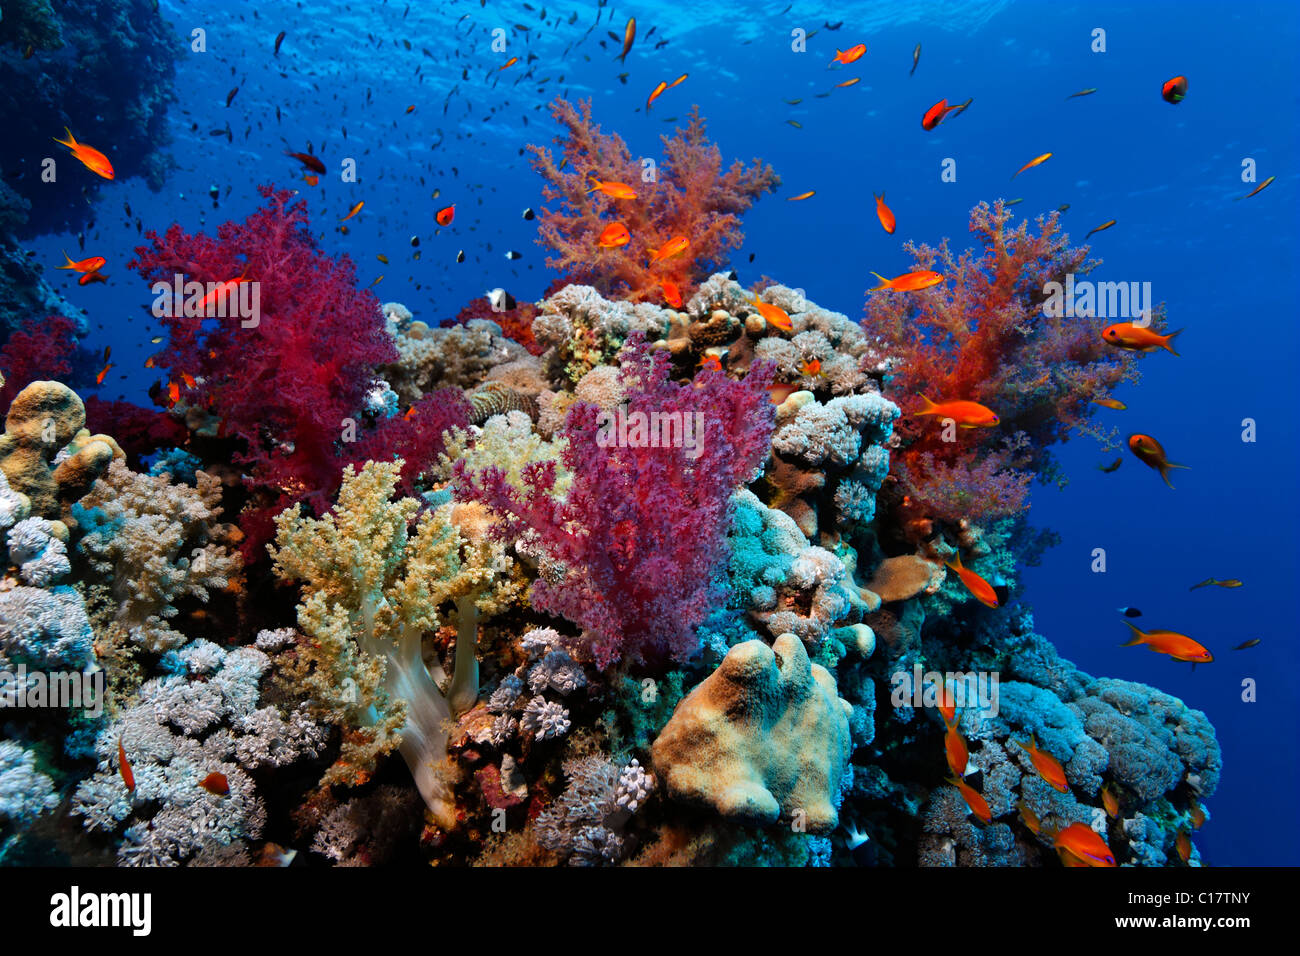 Coral reef with encrusting soft- and stone corals, Hurghada, Brother Islands, Red Sea, Egypt, Africa Stock Photo